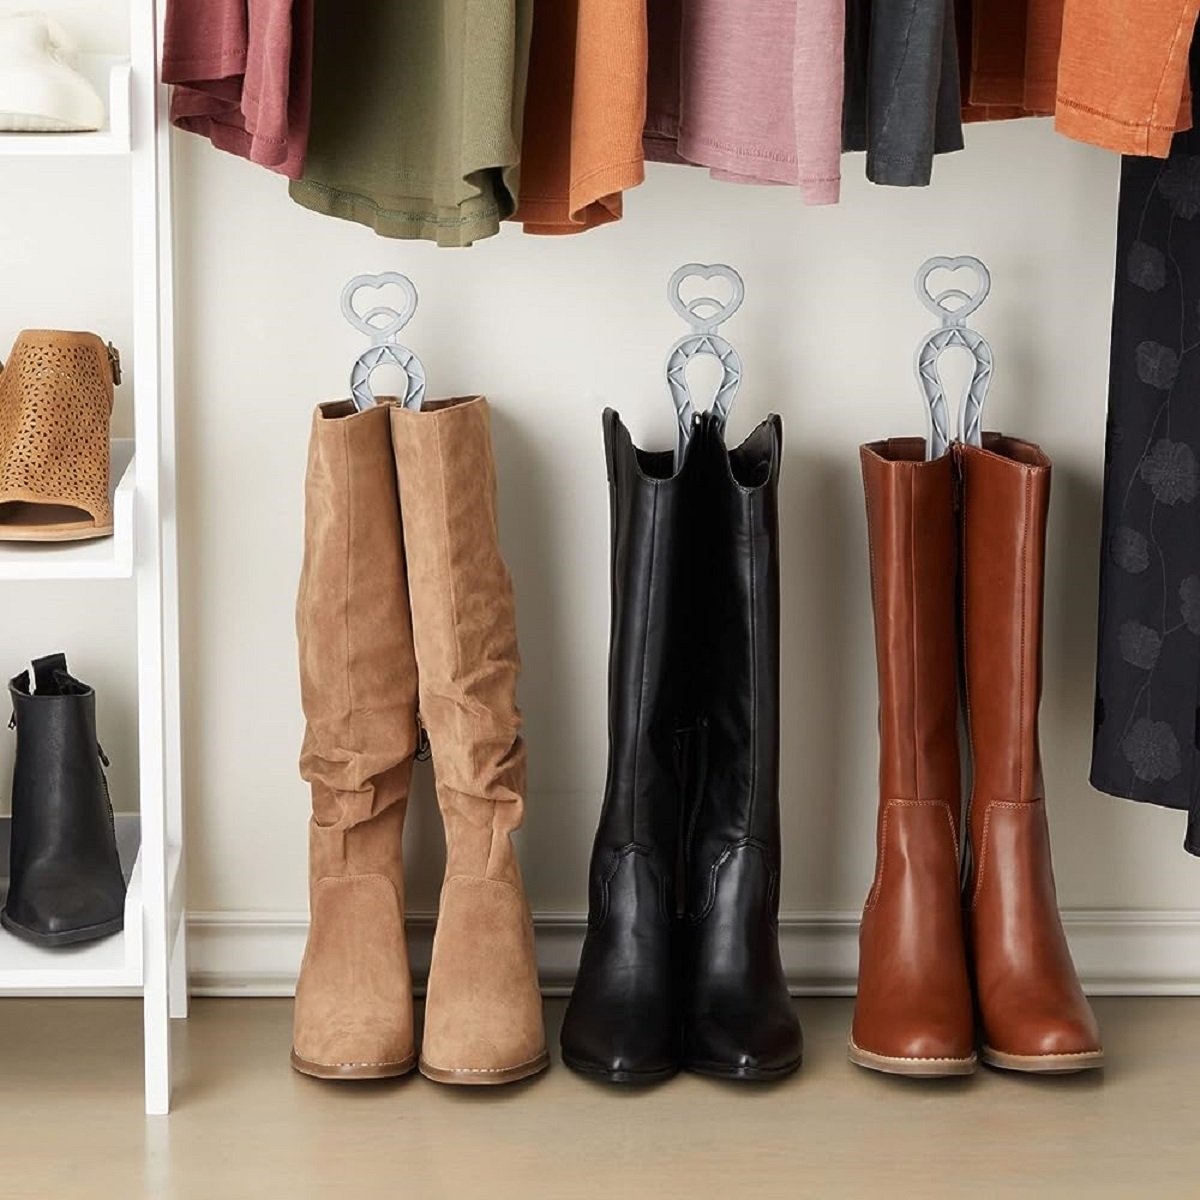 How to Keep Tall Boots from Slouching (And Organize Your Closet